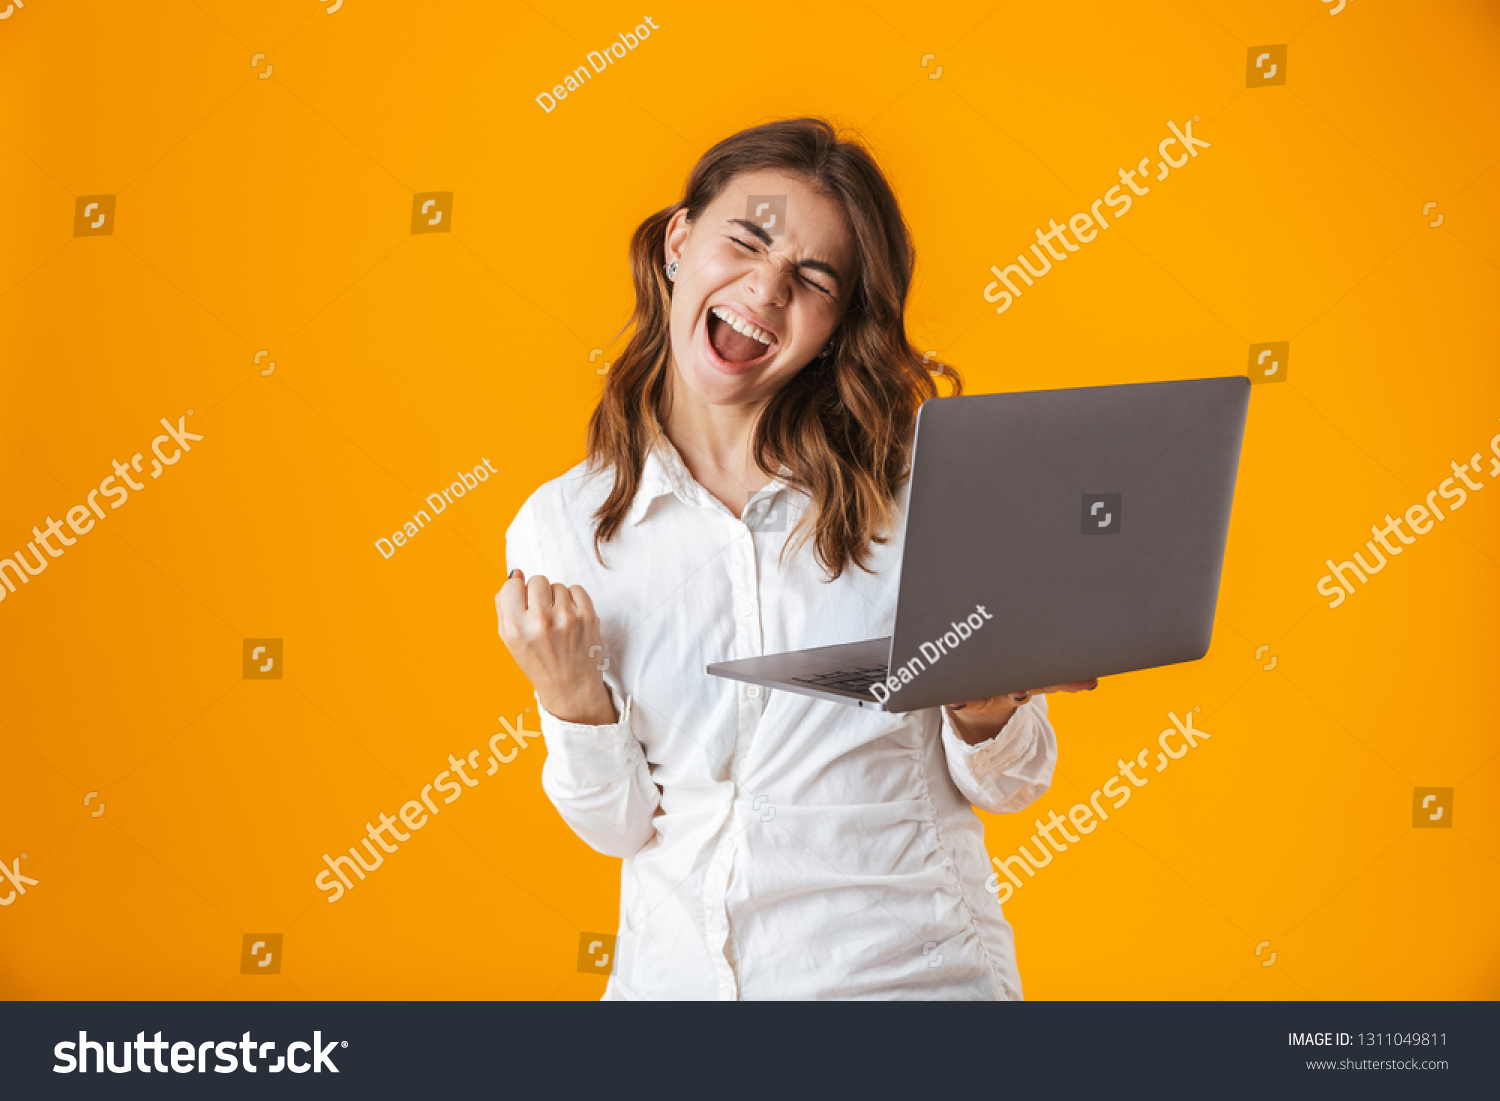 Portrait of a cheerful young woman wearing white shirt standing isolated over yellow background, holding laptop #1311049811